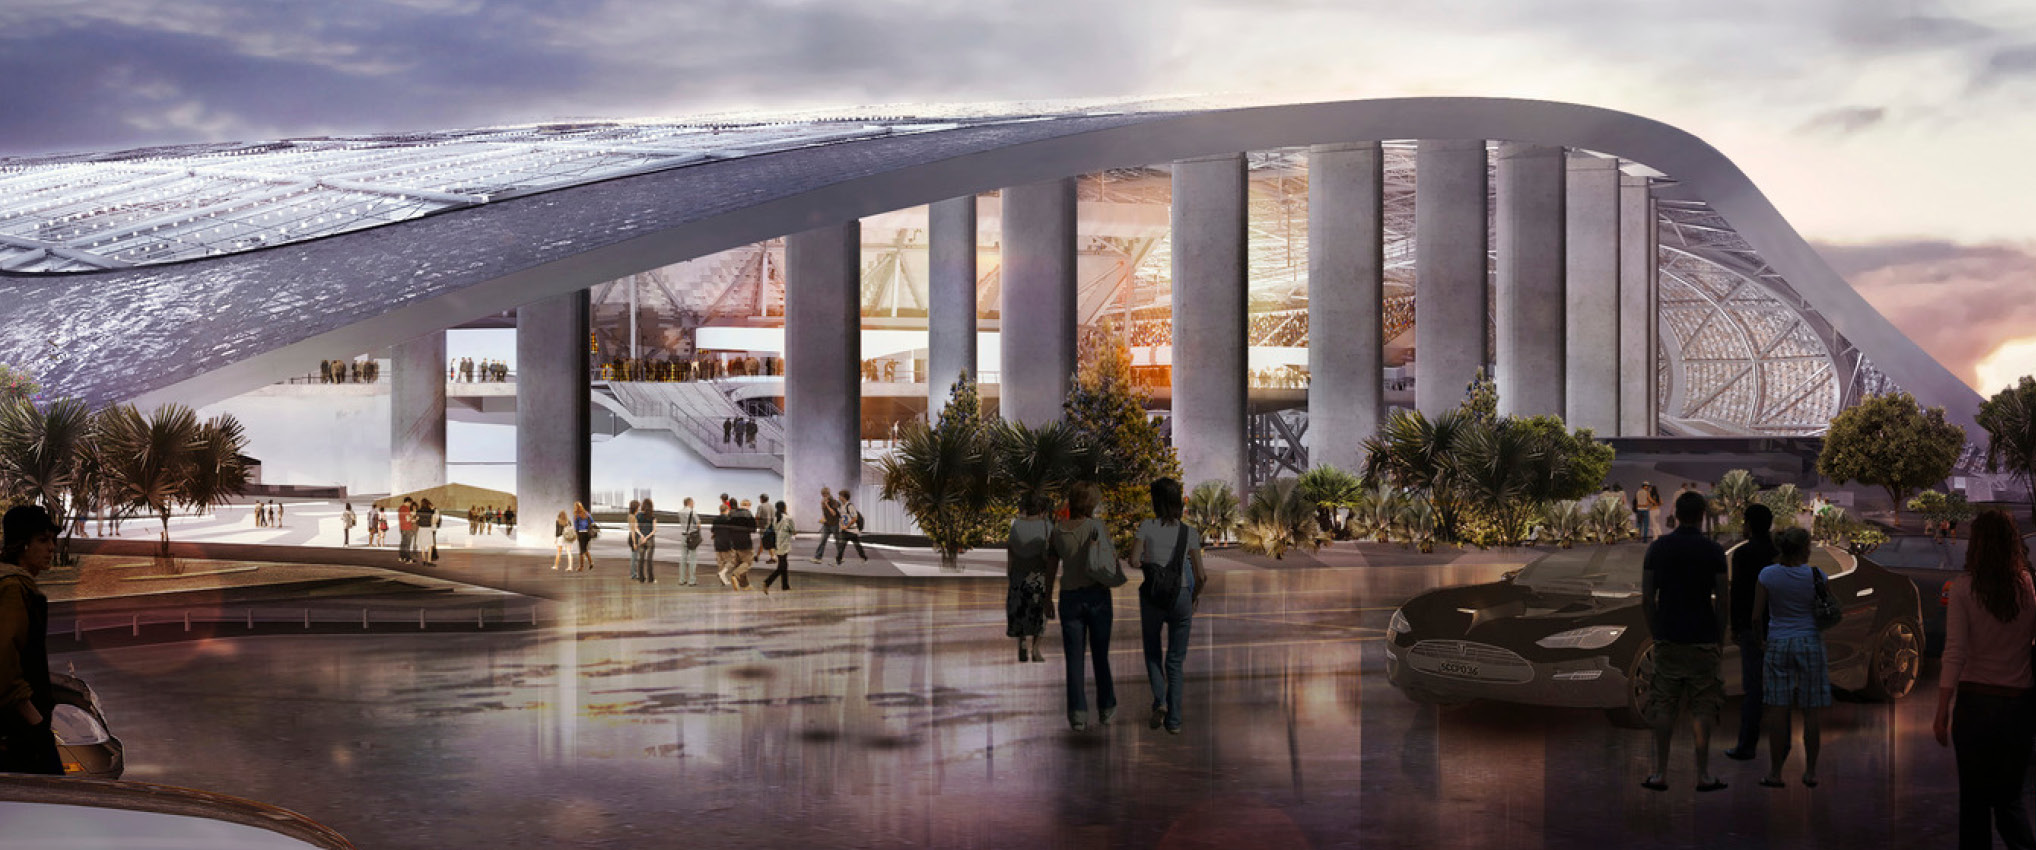 5 Stadium Projects Knocking It Out of the Park, Featuring Inglewood’s New Stadium District